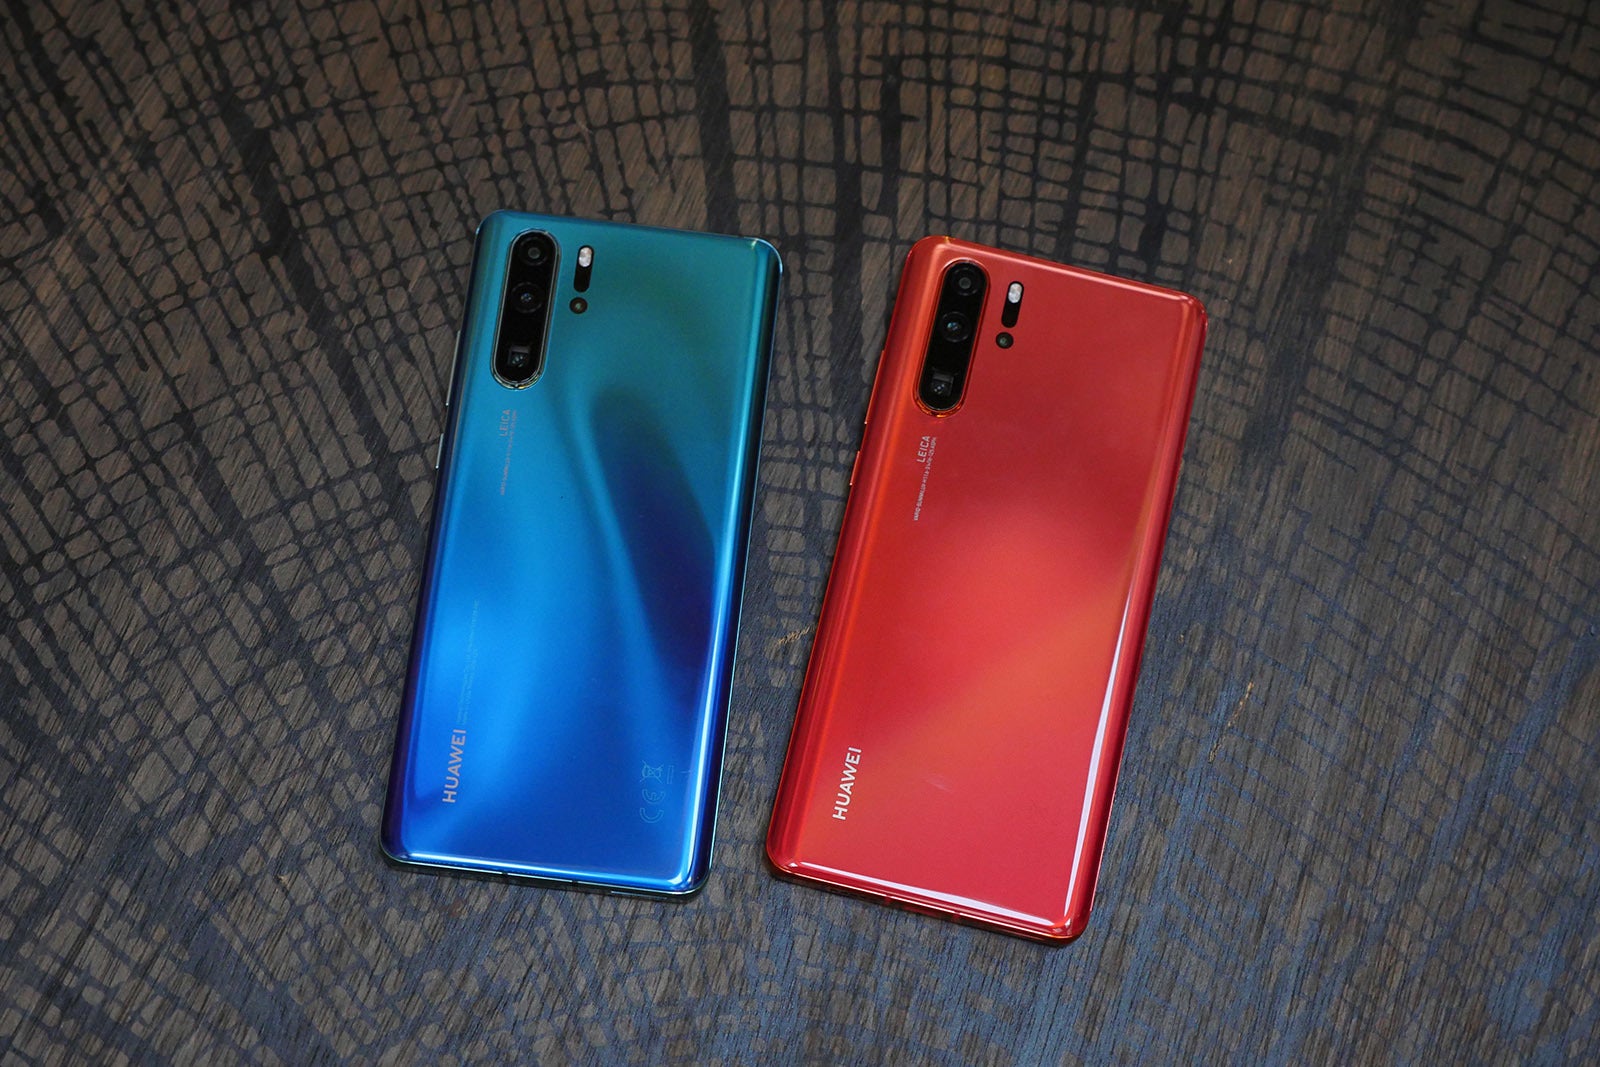 Huawei P30 Pro lands, promising to be the ultimate phone camera (hands-on)